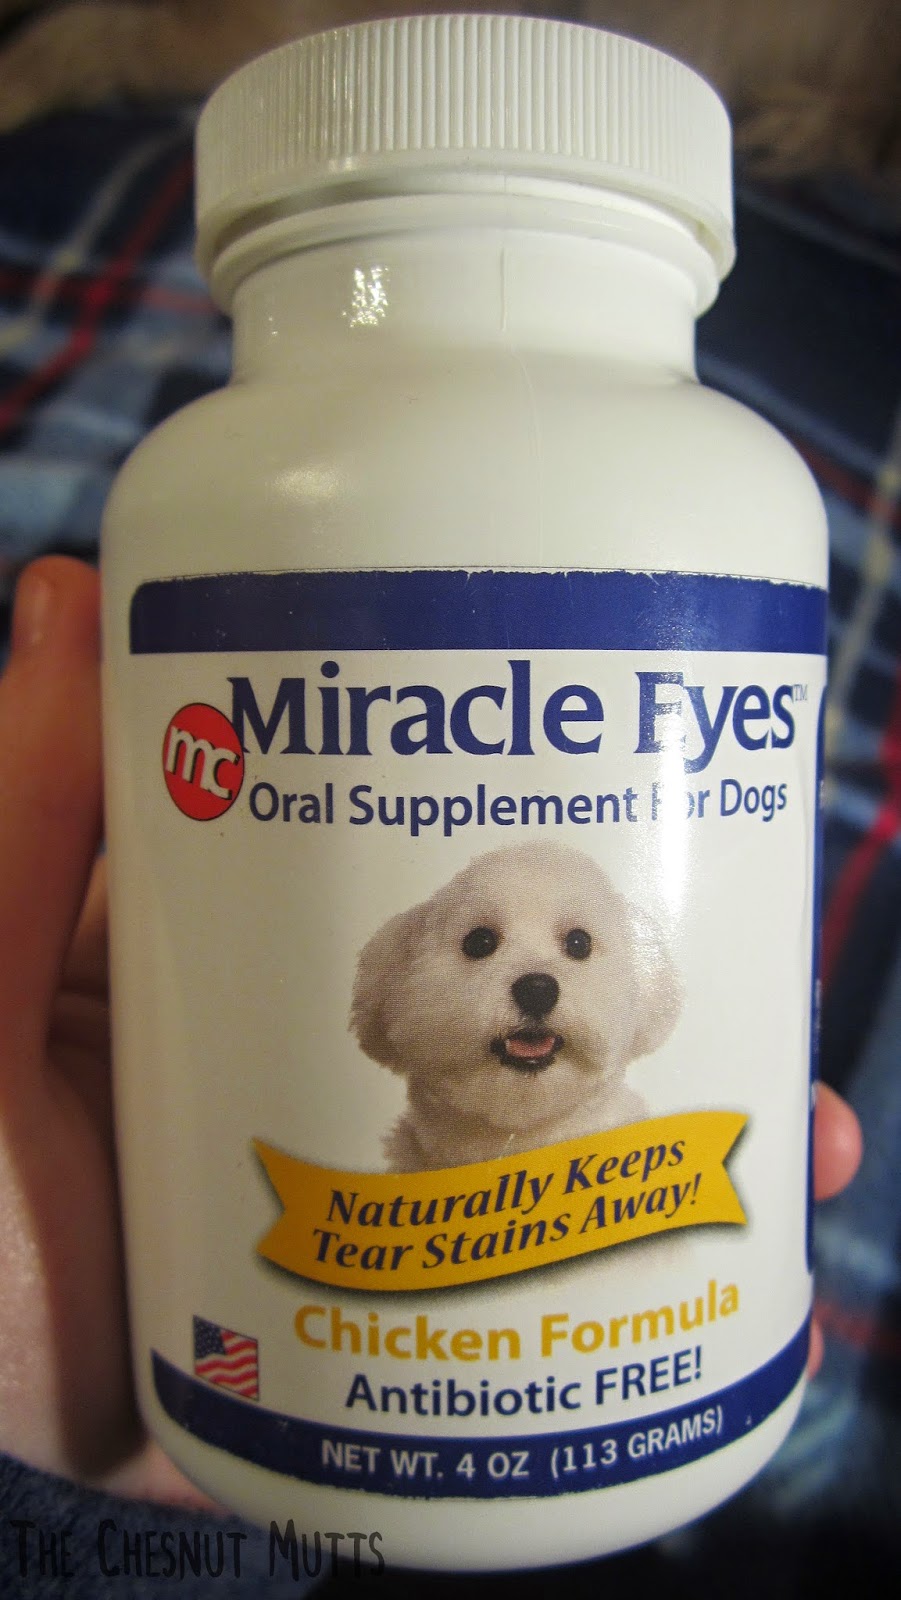 Miracle Eyes oral Supplement for dogs Chicken formula antibiotic free